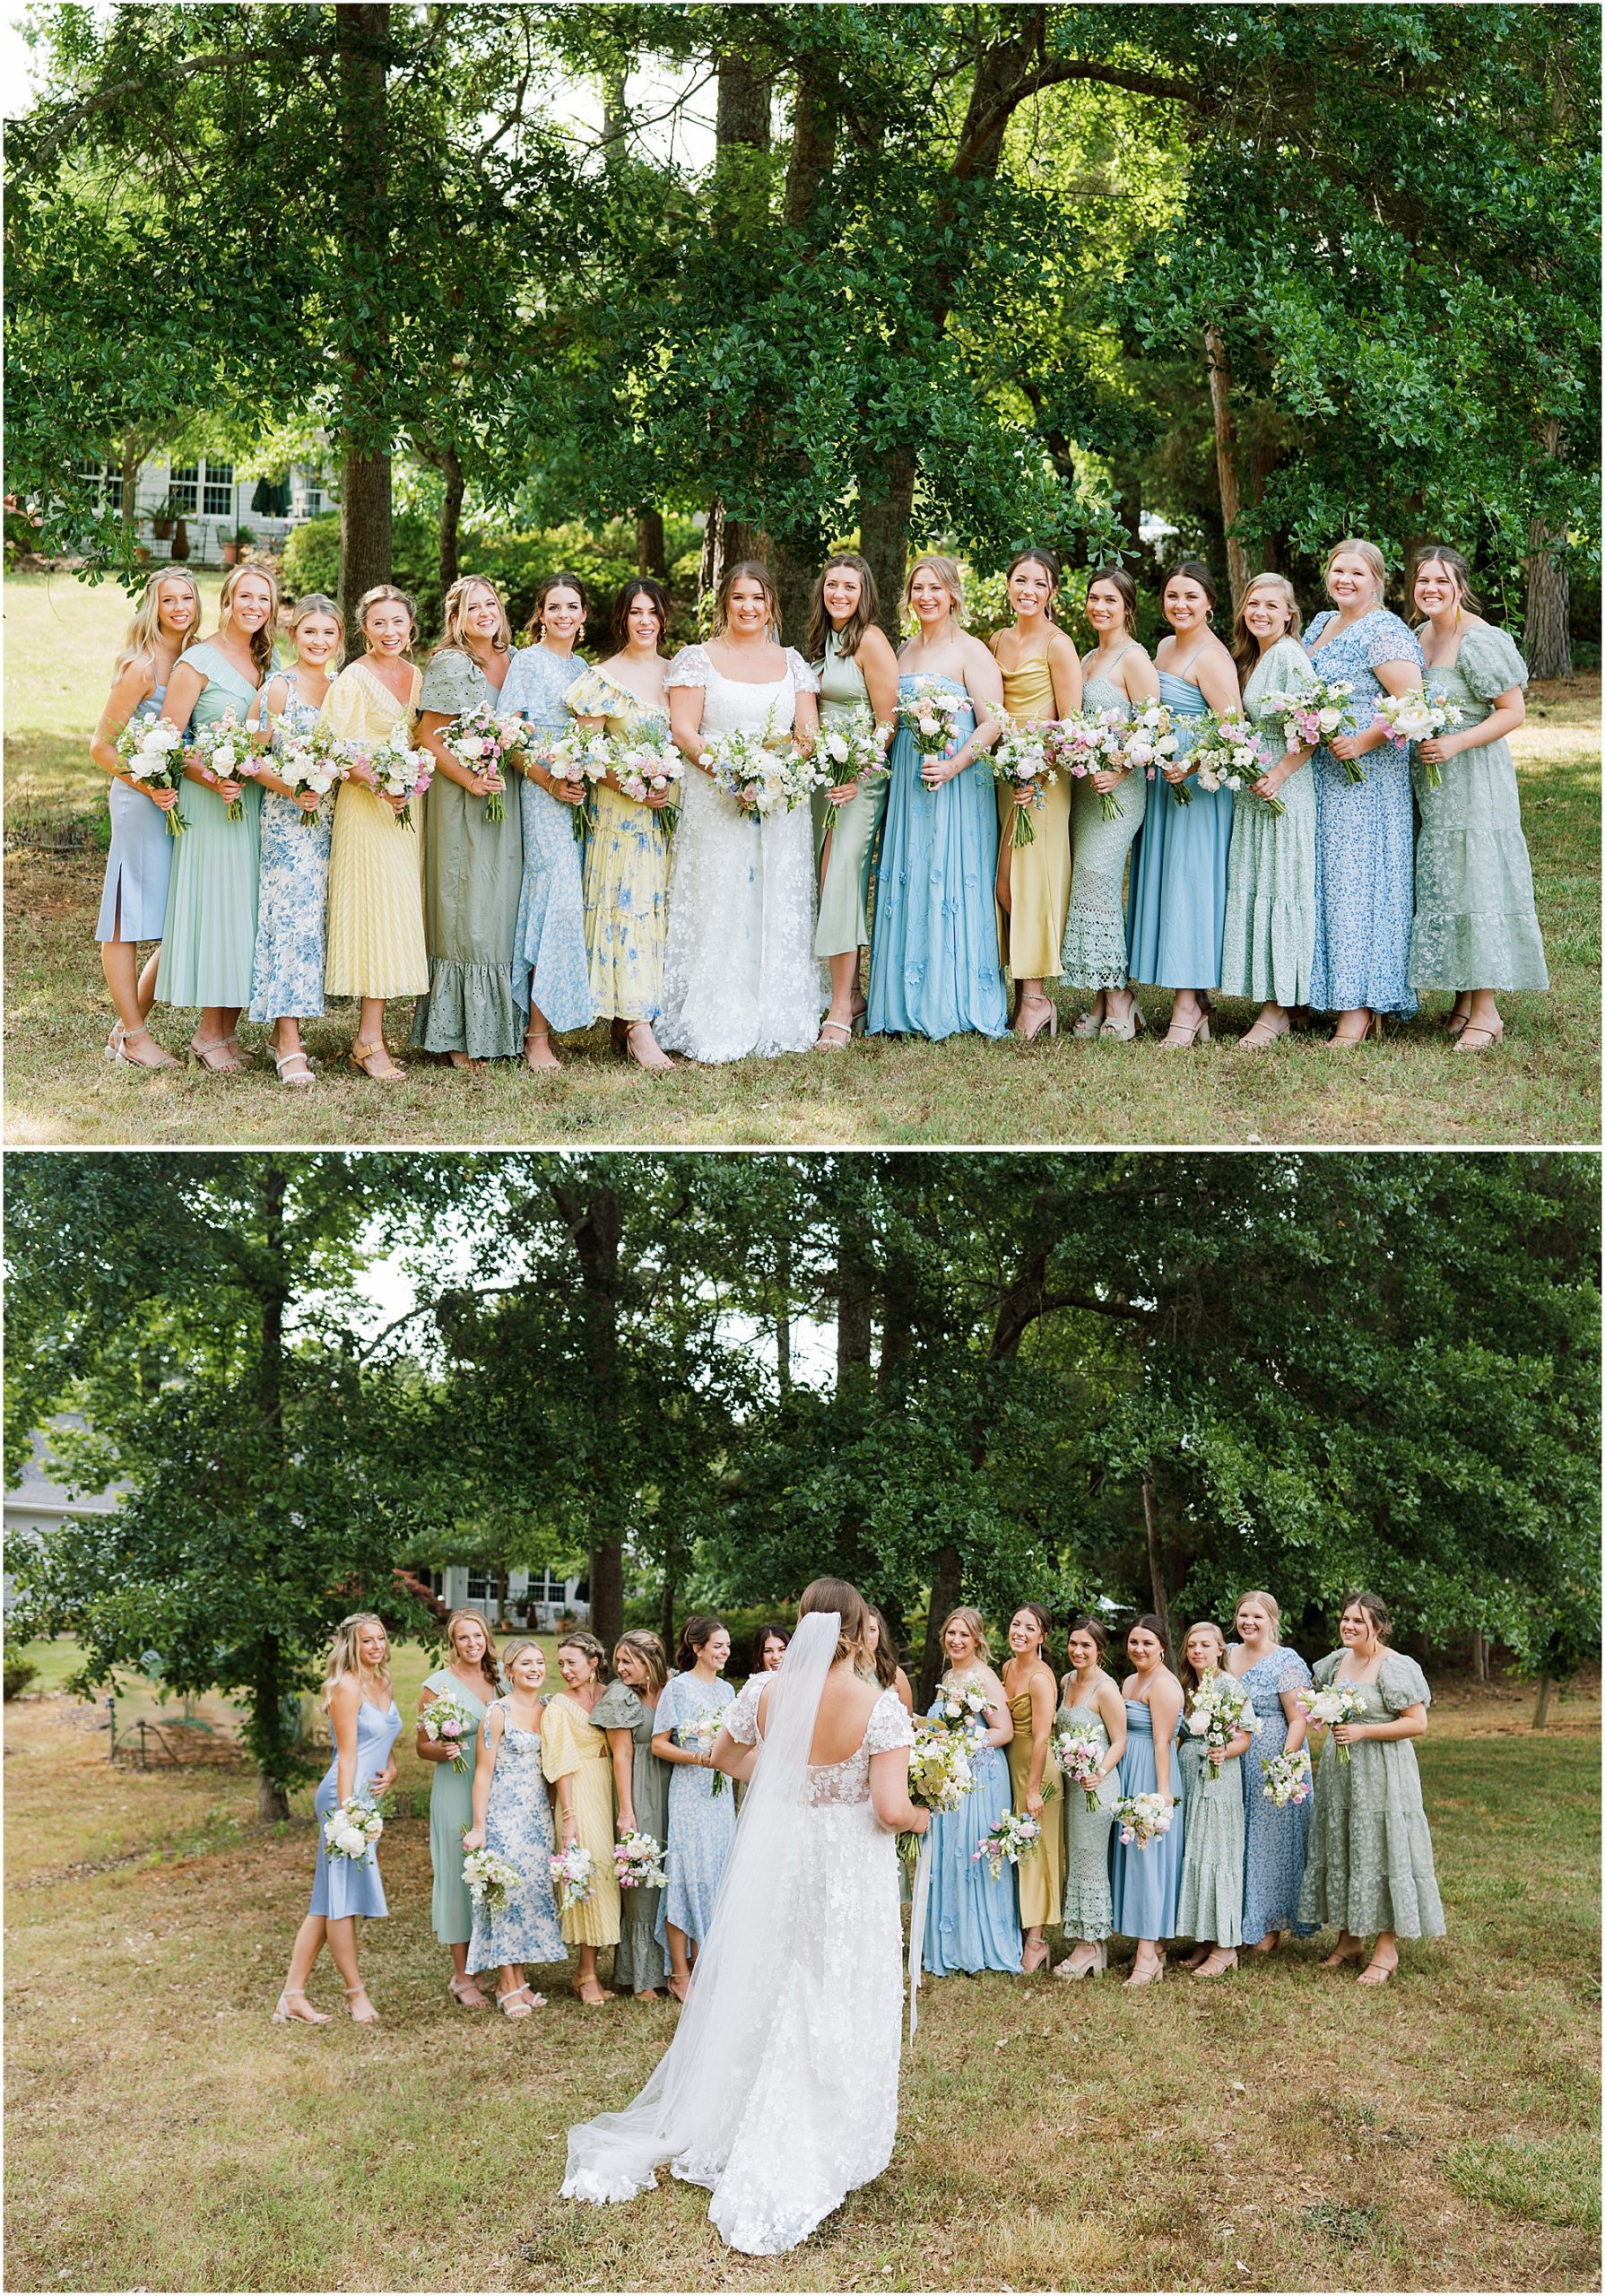 Bride with bridesmaids. Bridesmaids in different floral dresses.